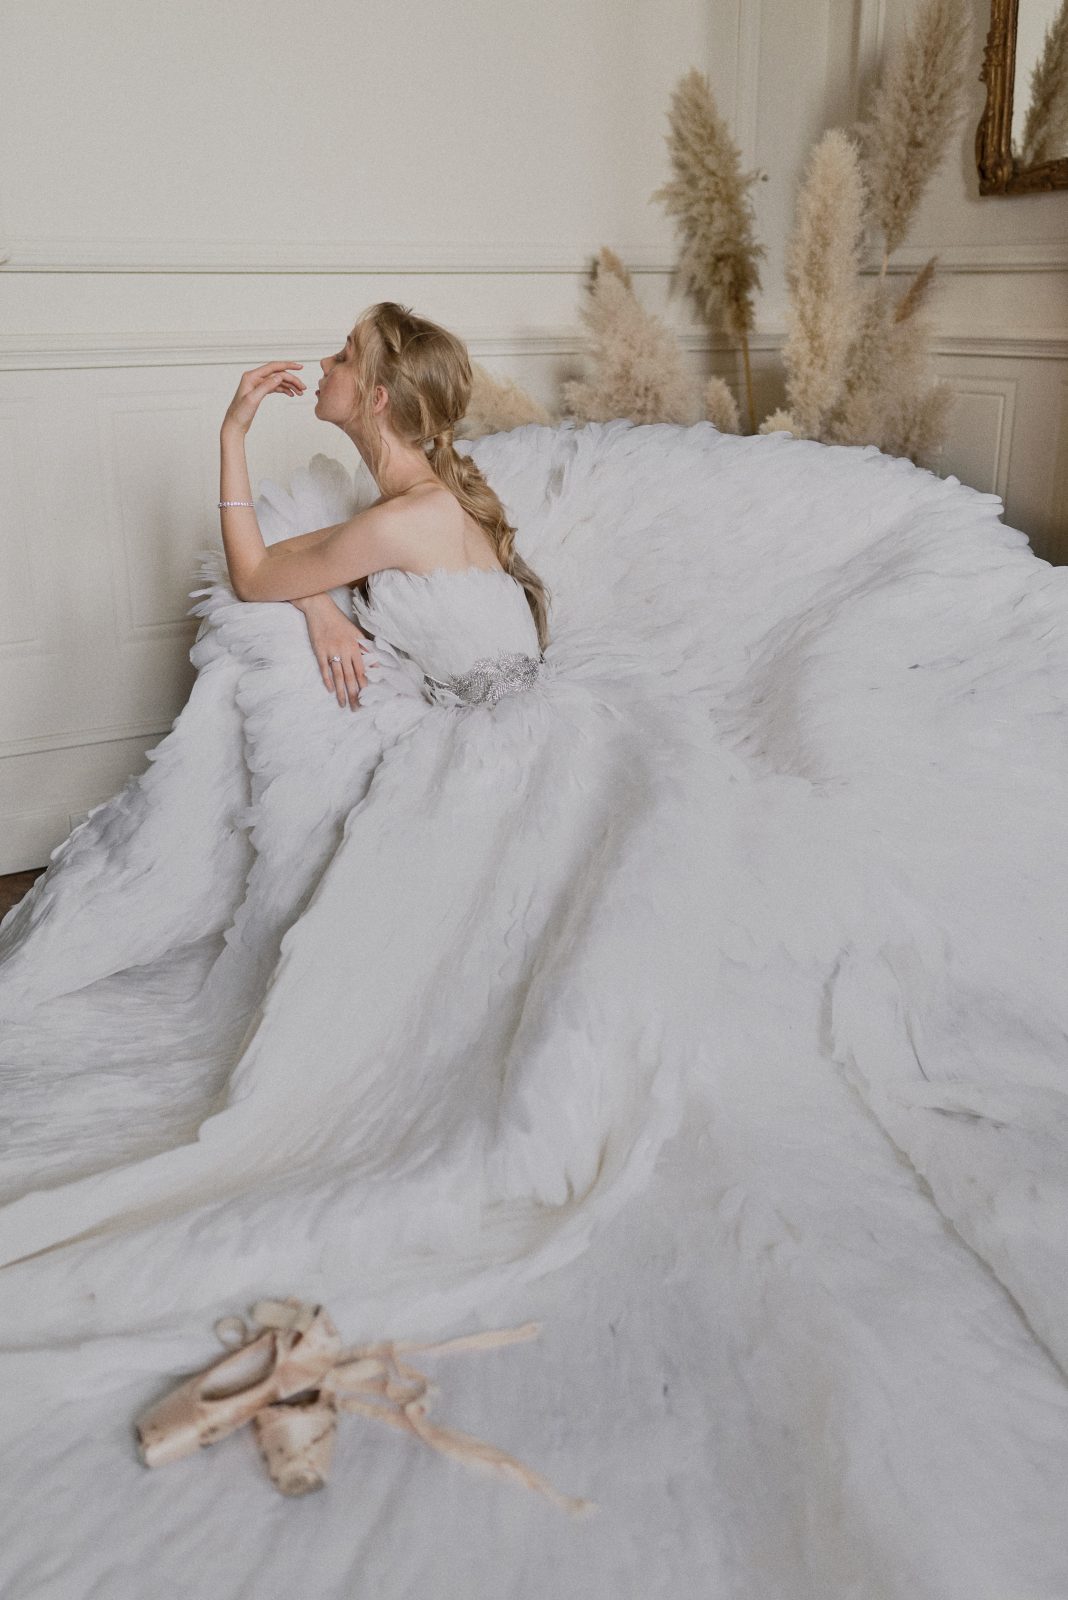 Swan Lake inspired bride with dramatic white feather gown